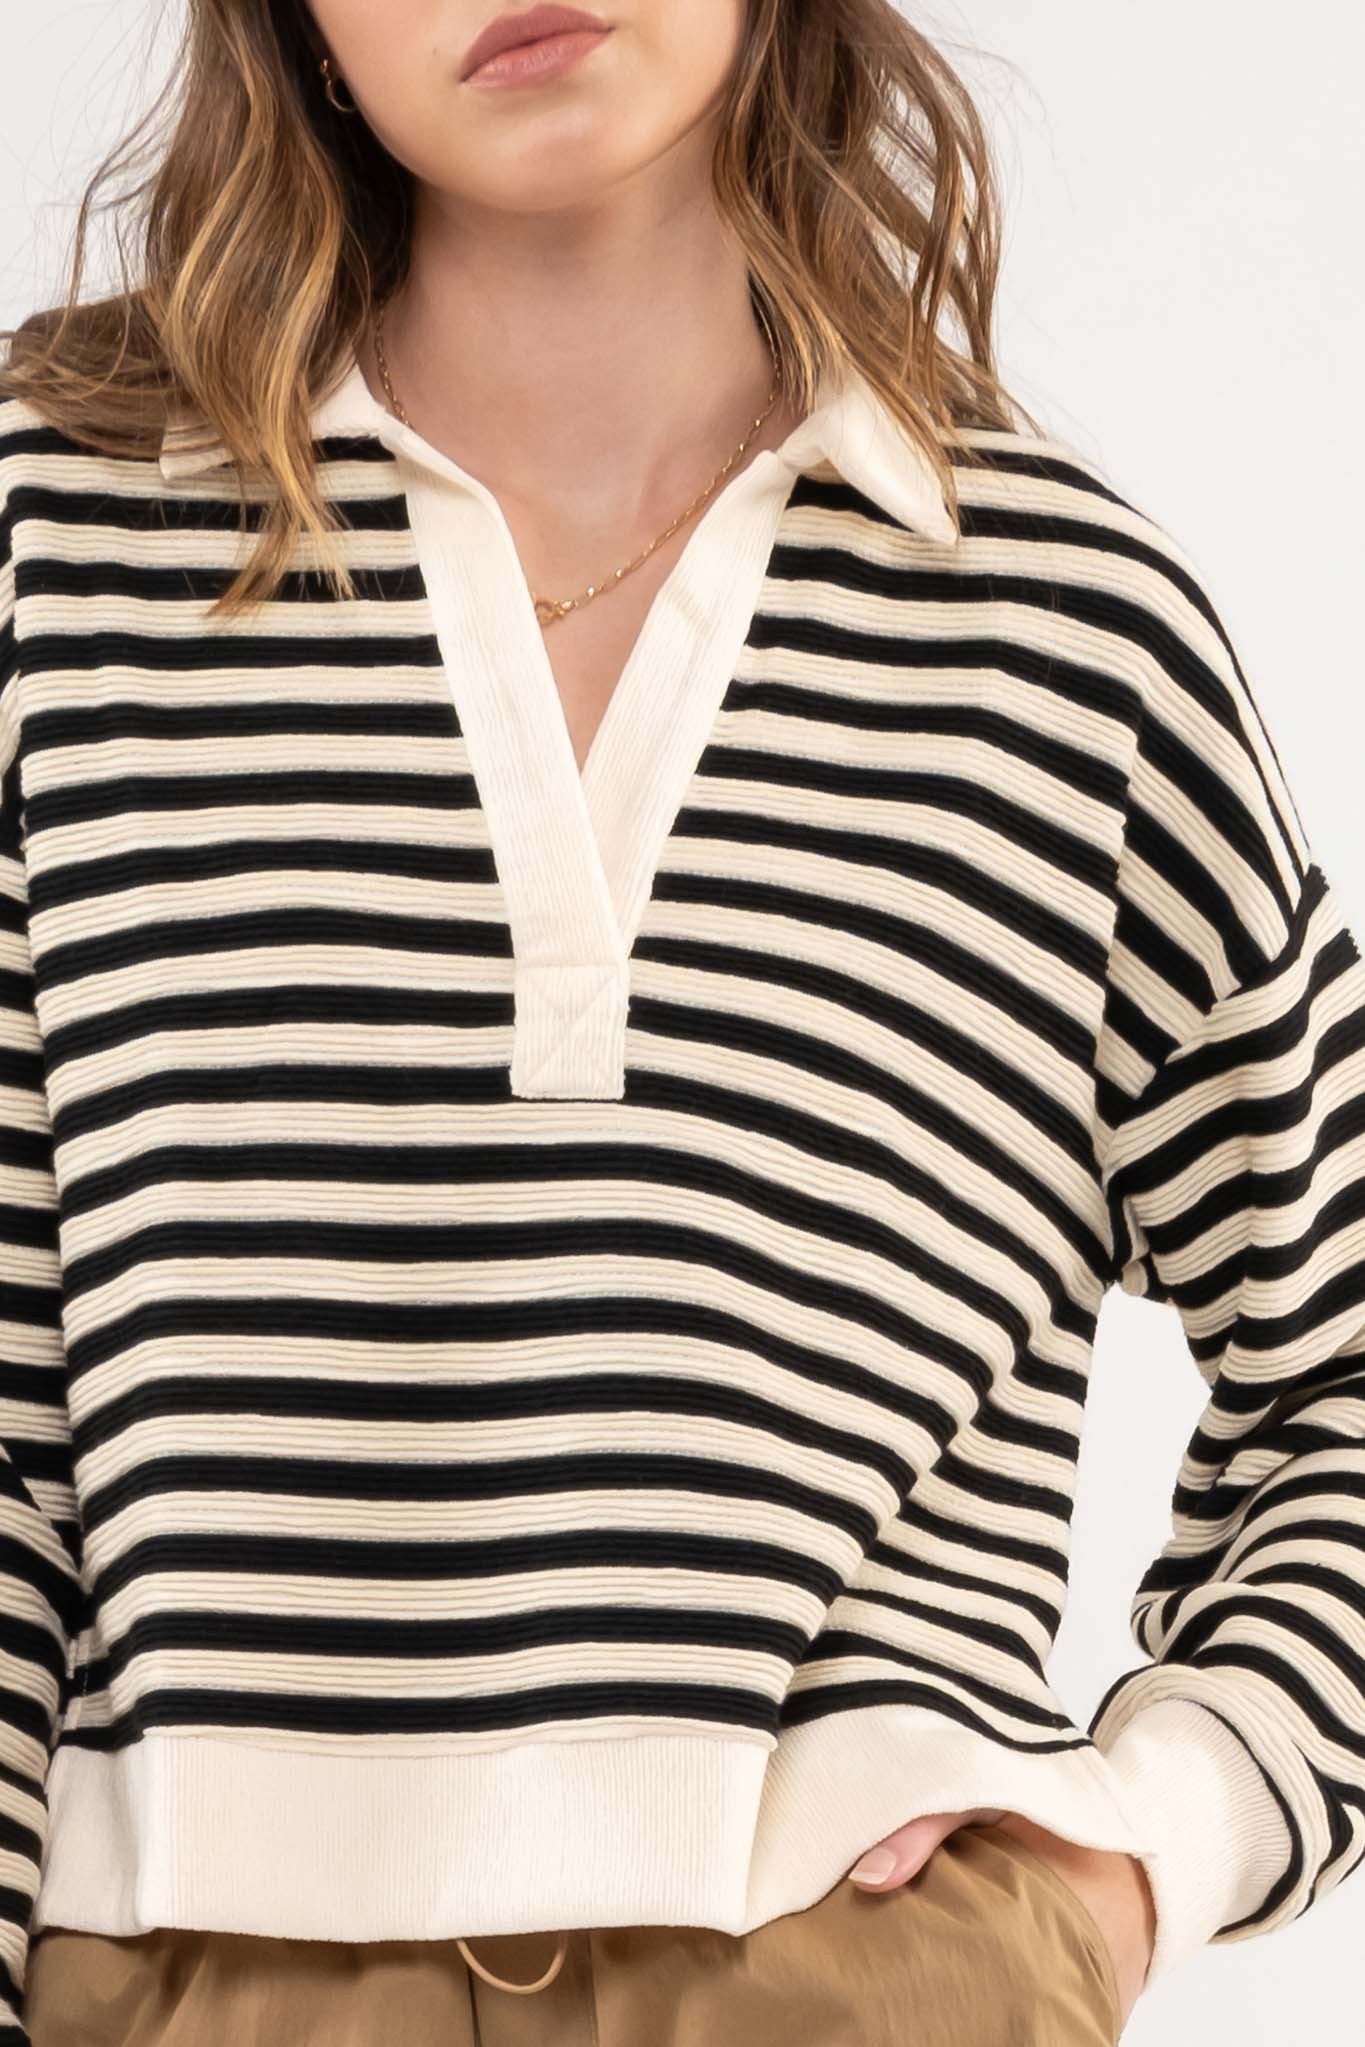 Pre-Order: The Cornwall Collared Top